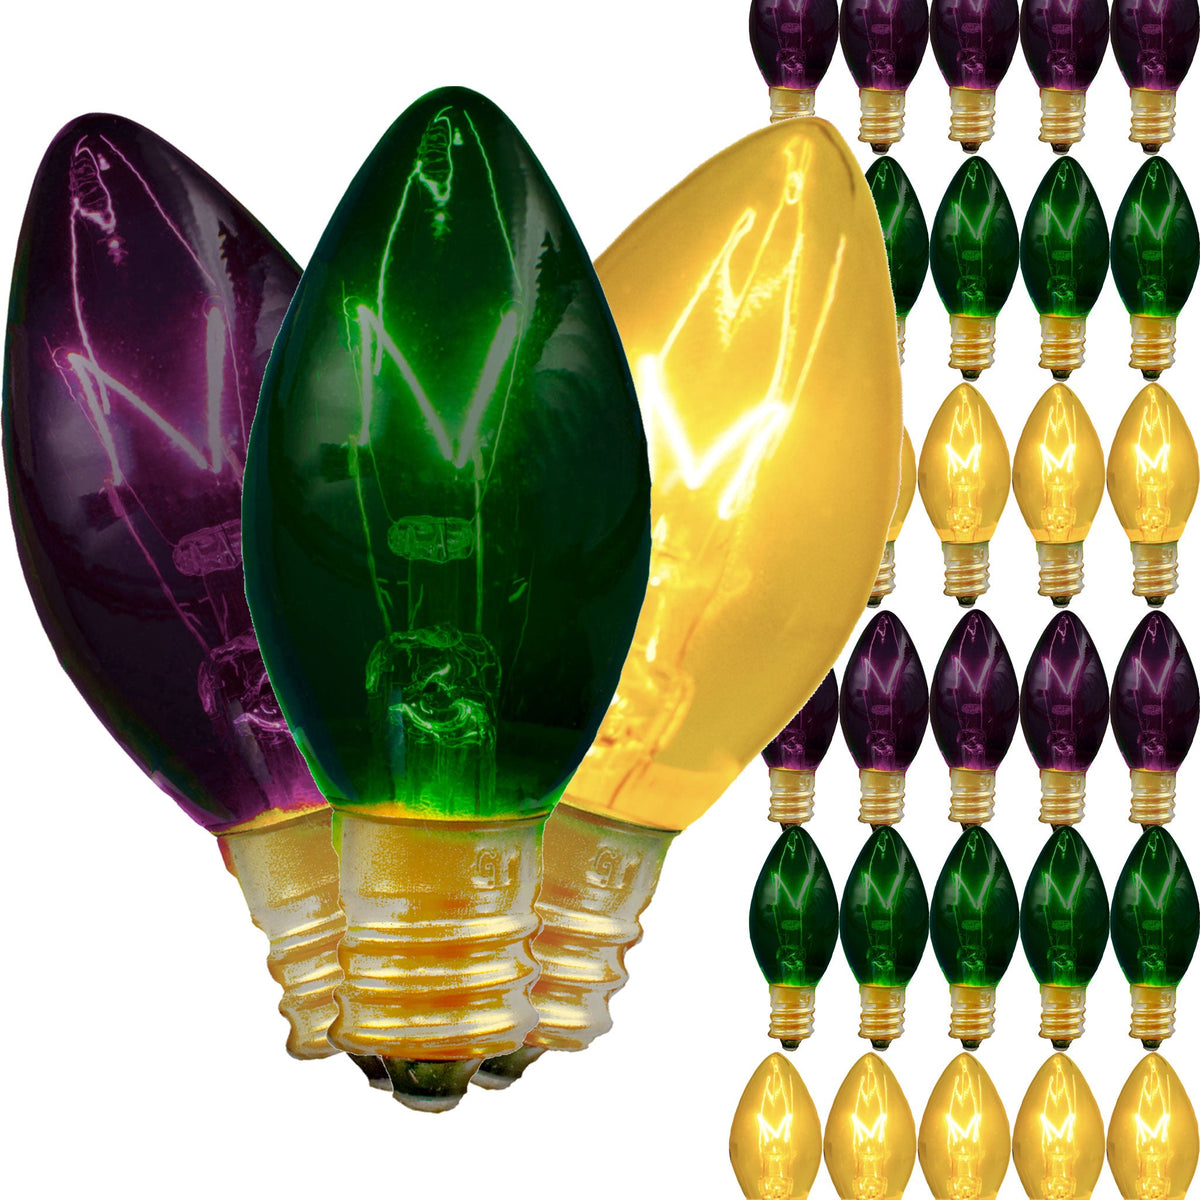 Mardi Gras Themed Lights Bulbs colored in Purple, Green and Gold.